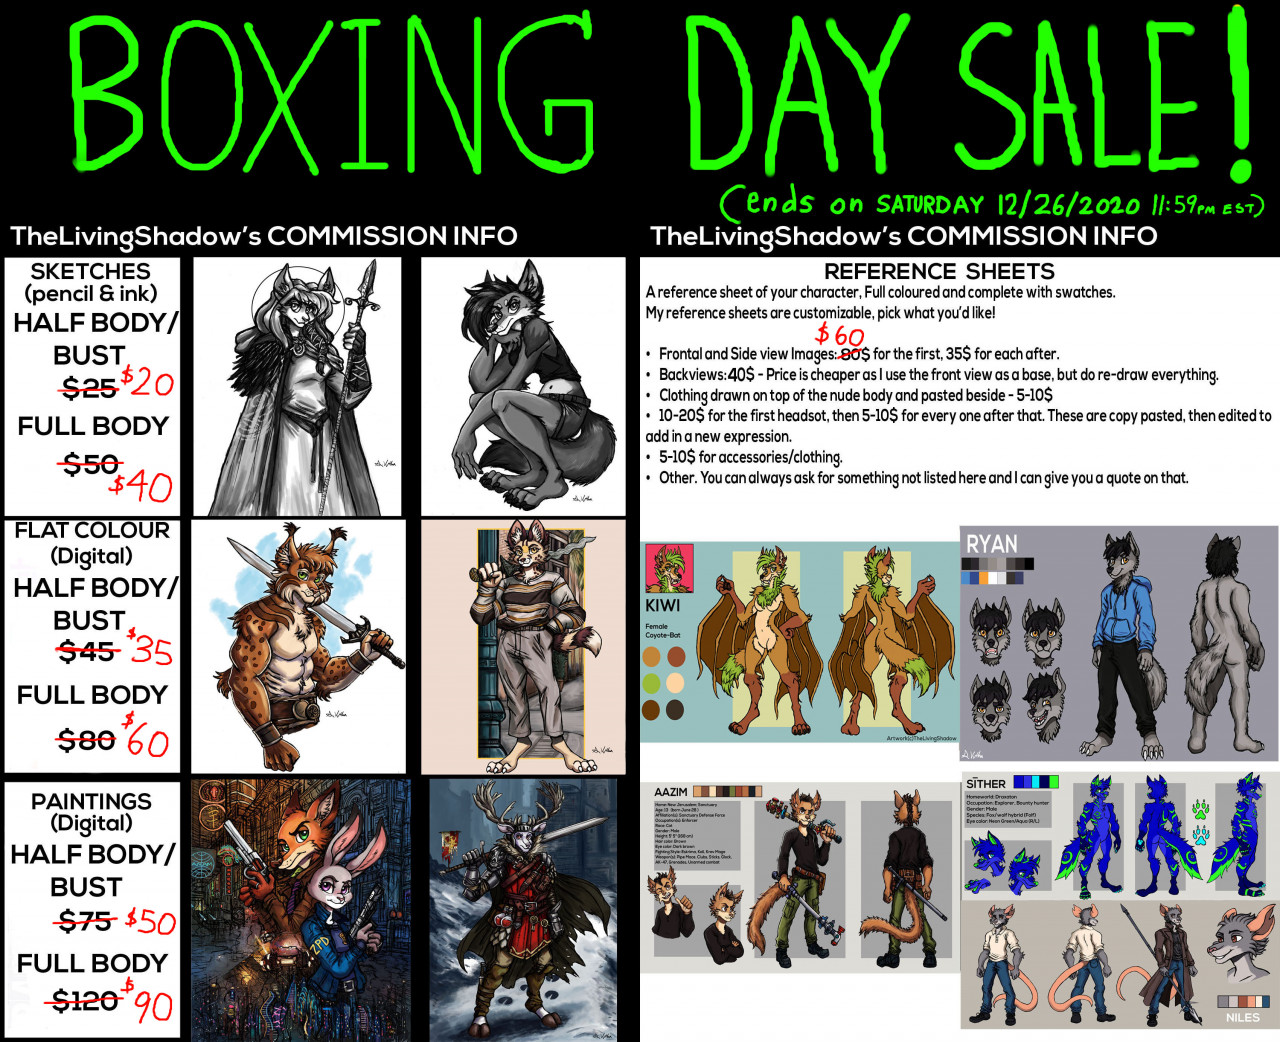 Top Boxing Day Sale Picks